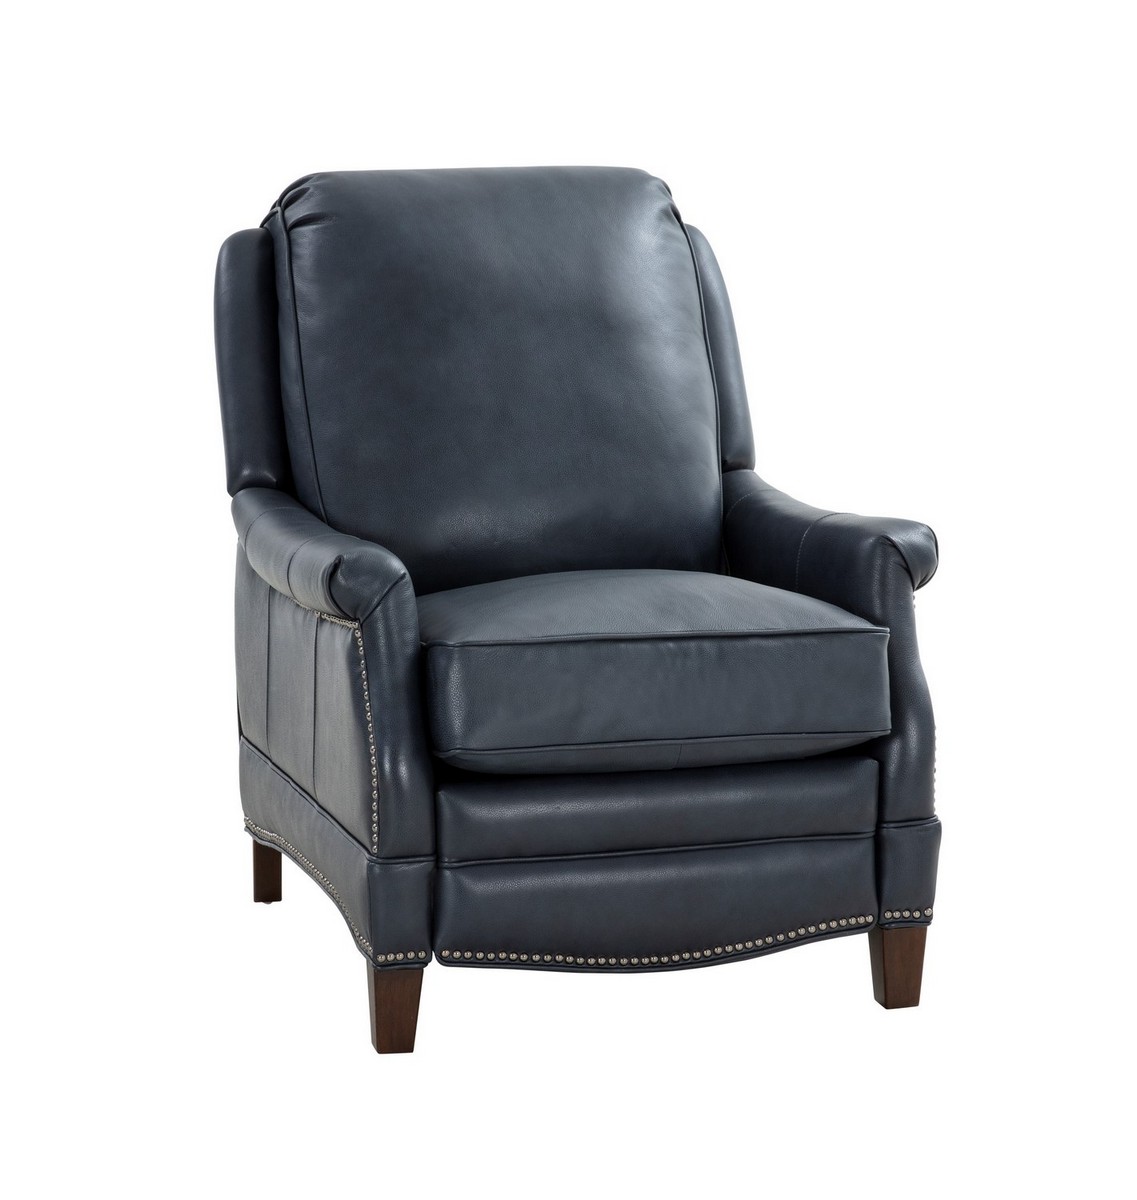 Barcalounger Ashebrooke Recliner Chair - Barone Navy Blue/All Leather